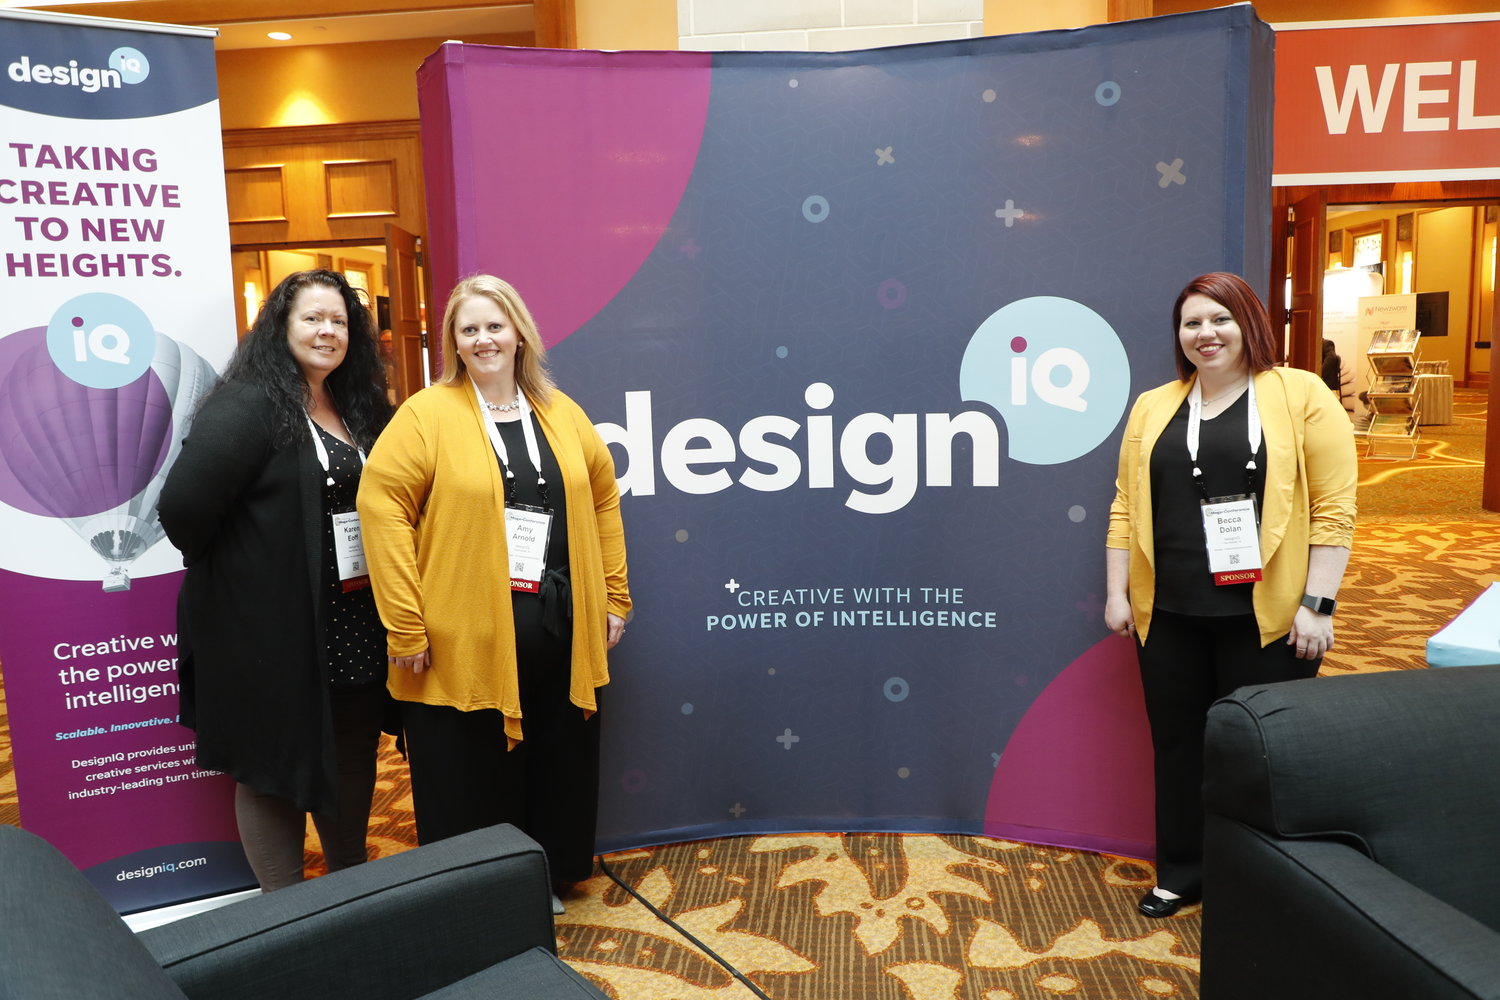 Monday photos of the 2020 Mega Conference at the Omni Hotel in Fort Worth, Texas, Feb. 17, 2020. (Photo by Bob Booth)